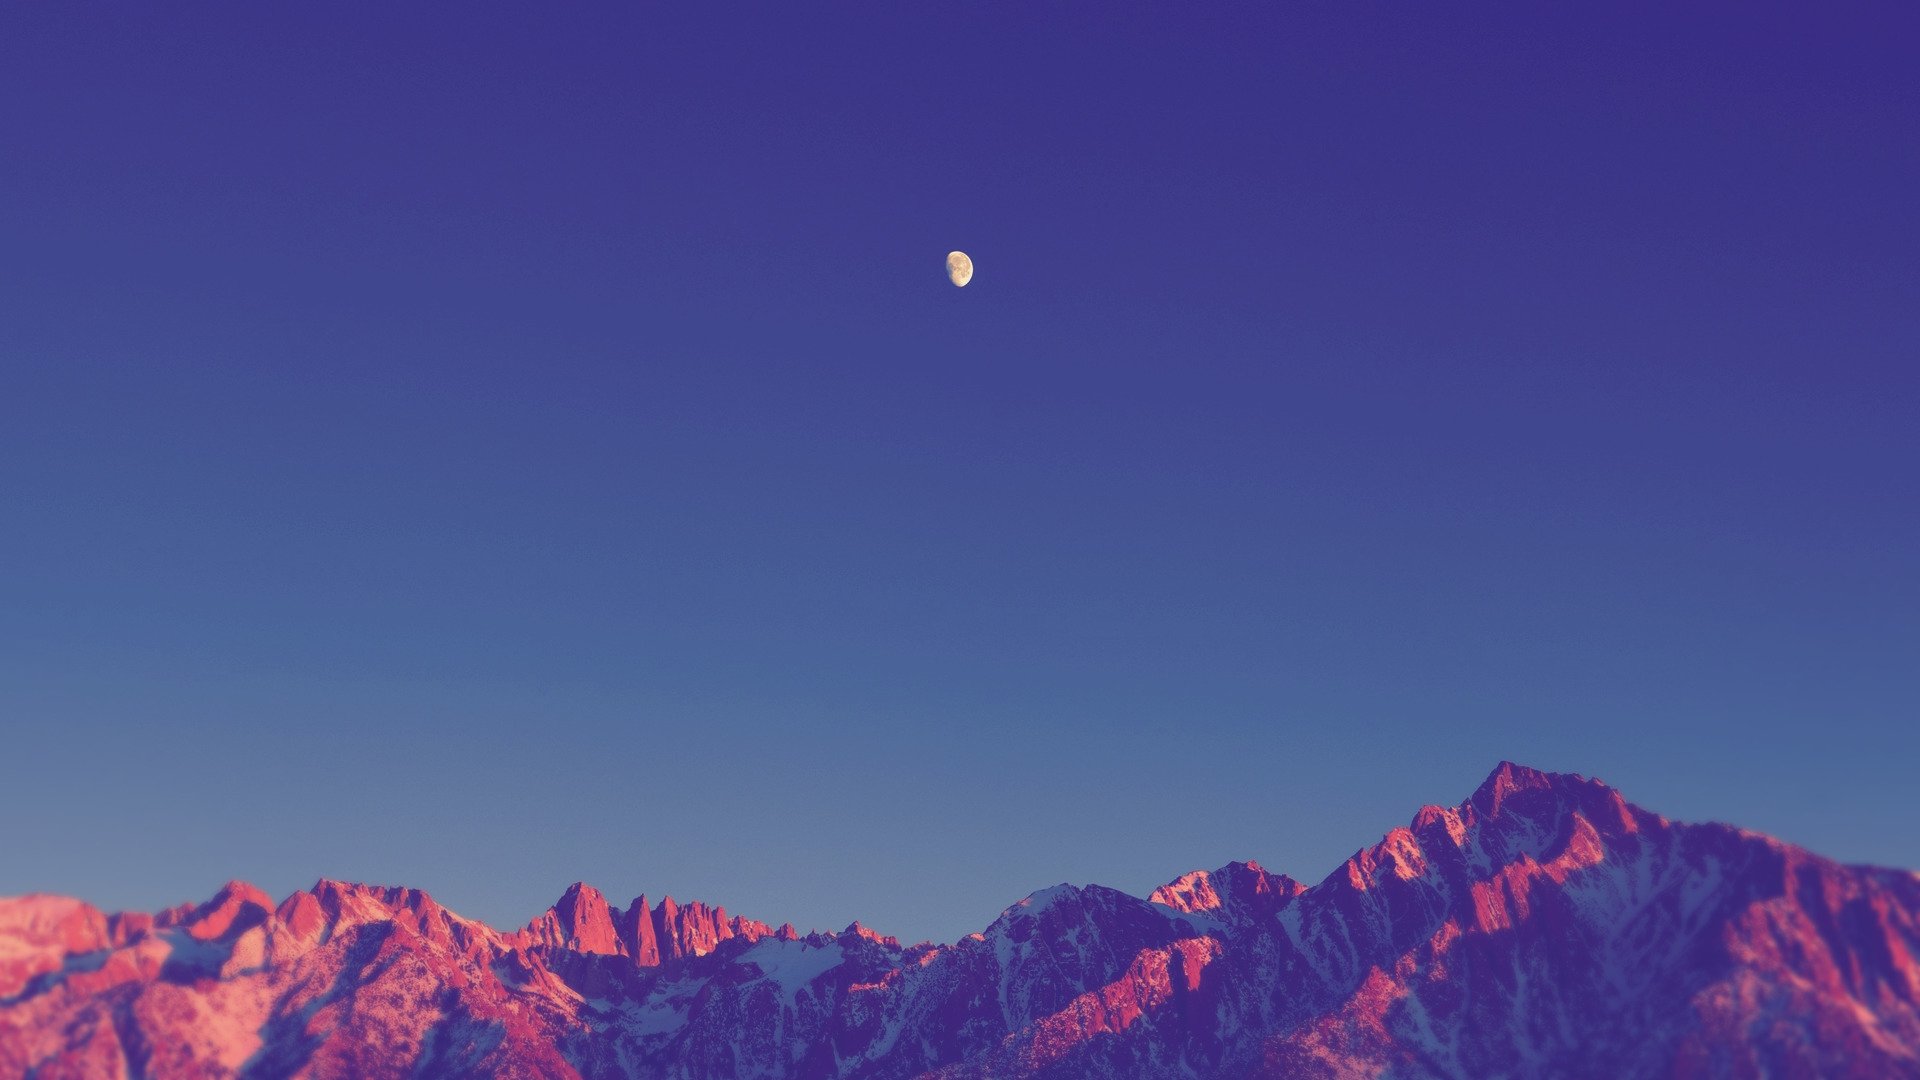 150 Simple Desktop Wallpapers For Minimalist Lovers - icanbecreative